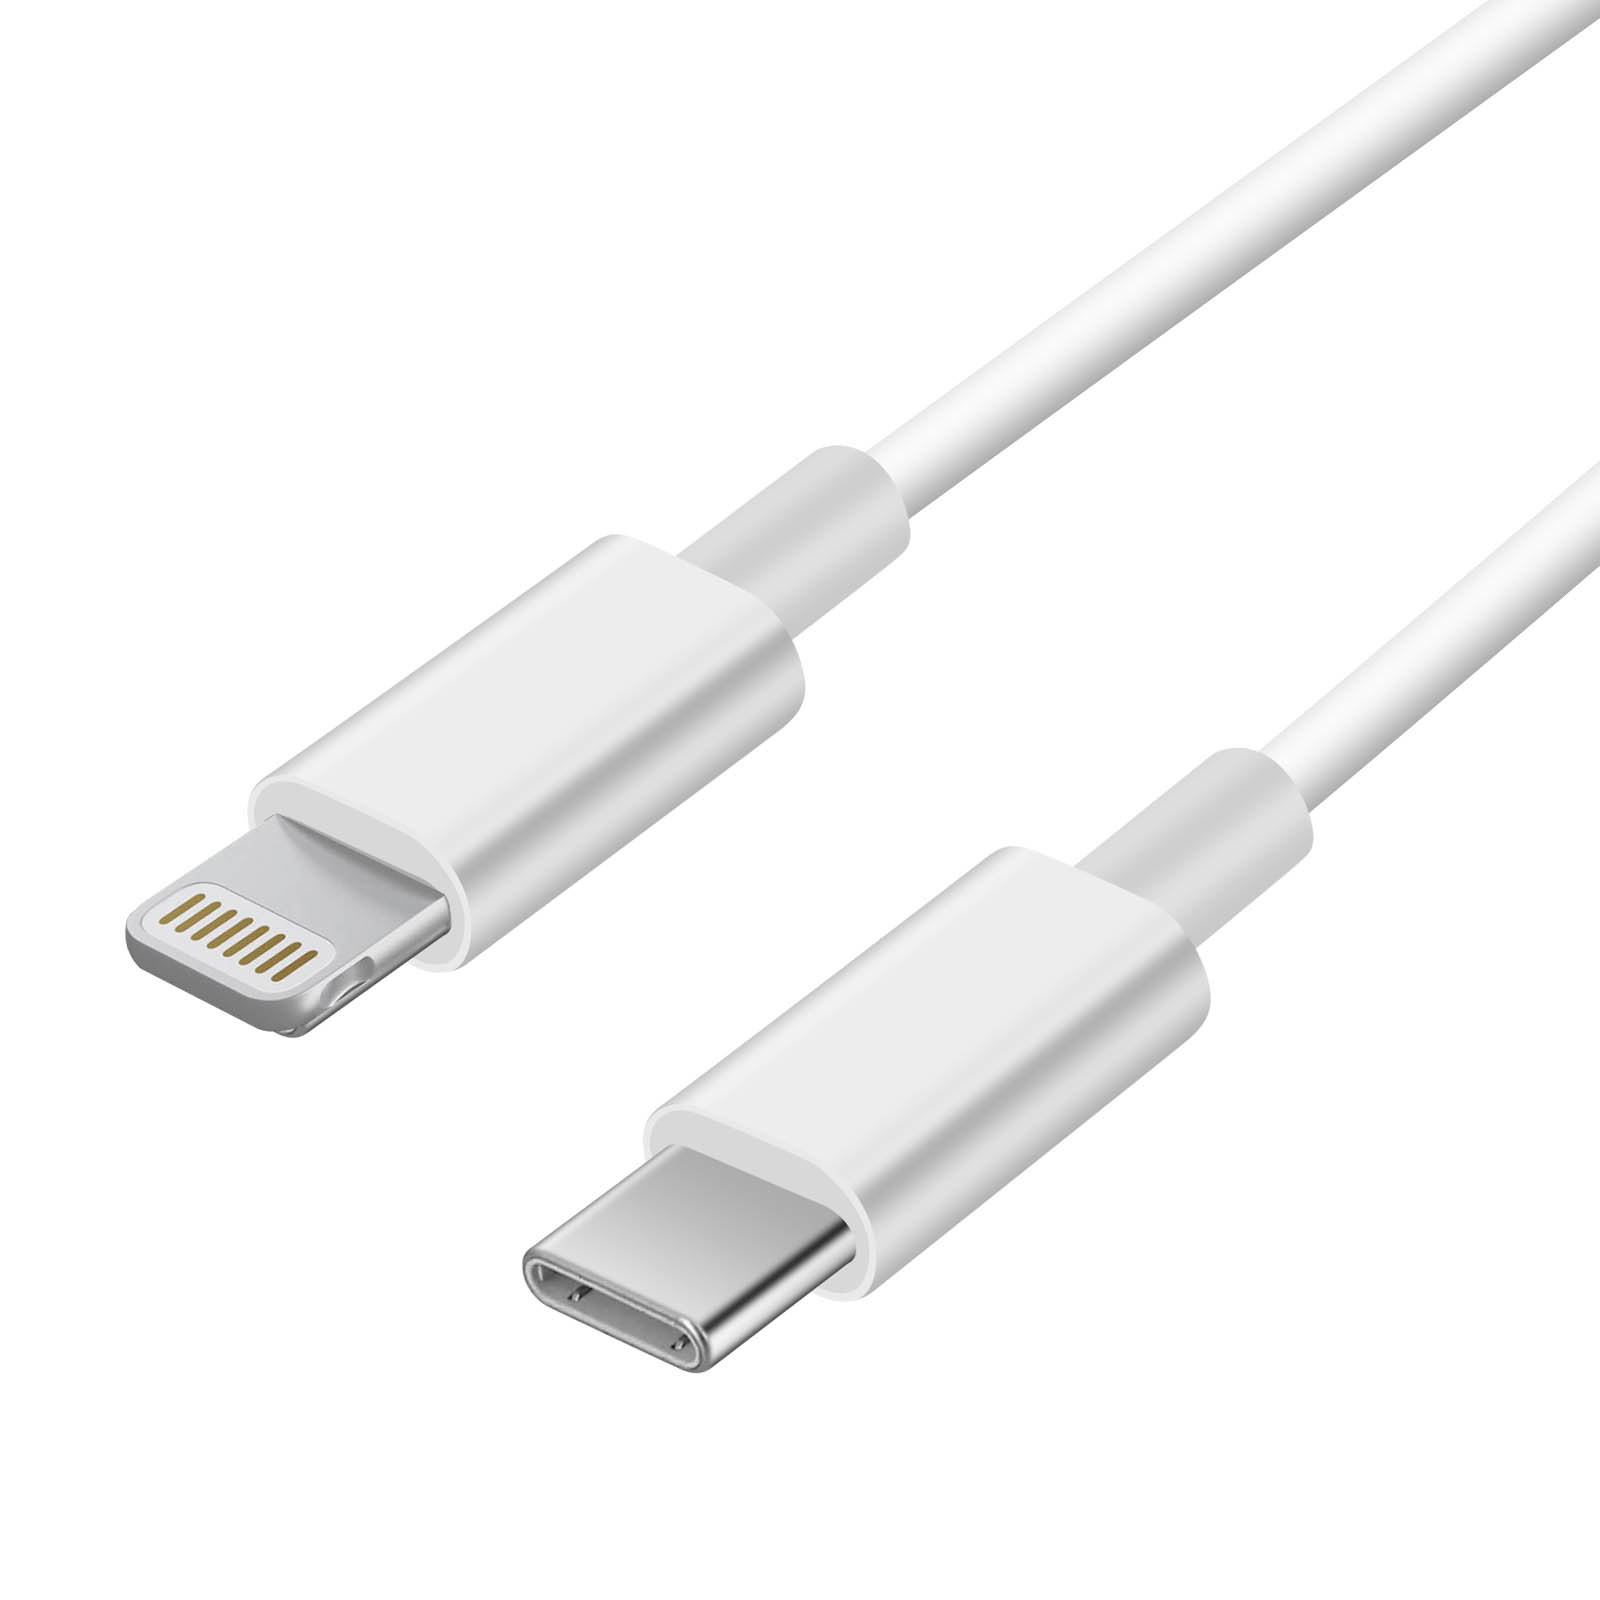 We Câble Usb-c Vers Lightning 2m Avec Charge Rapide Power Delivery